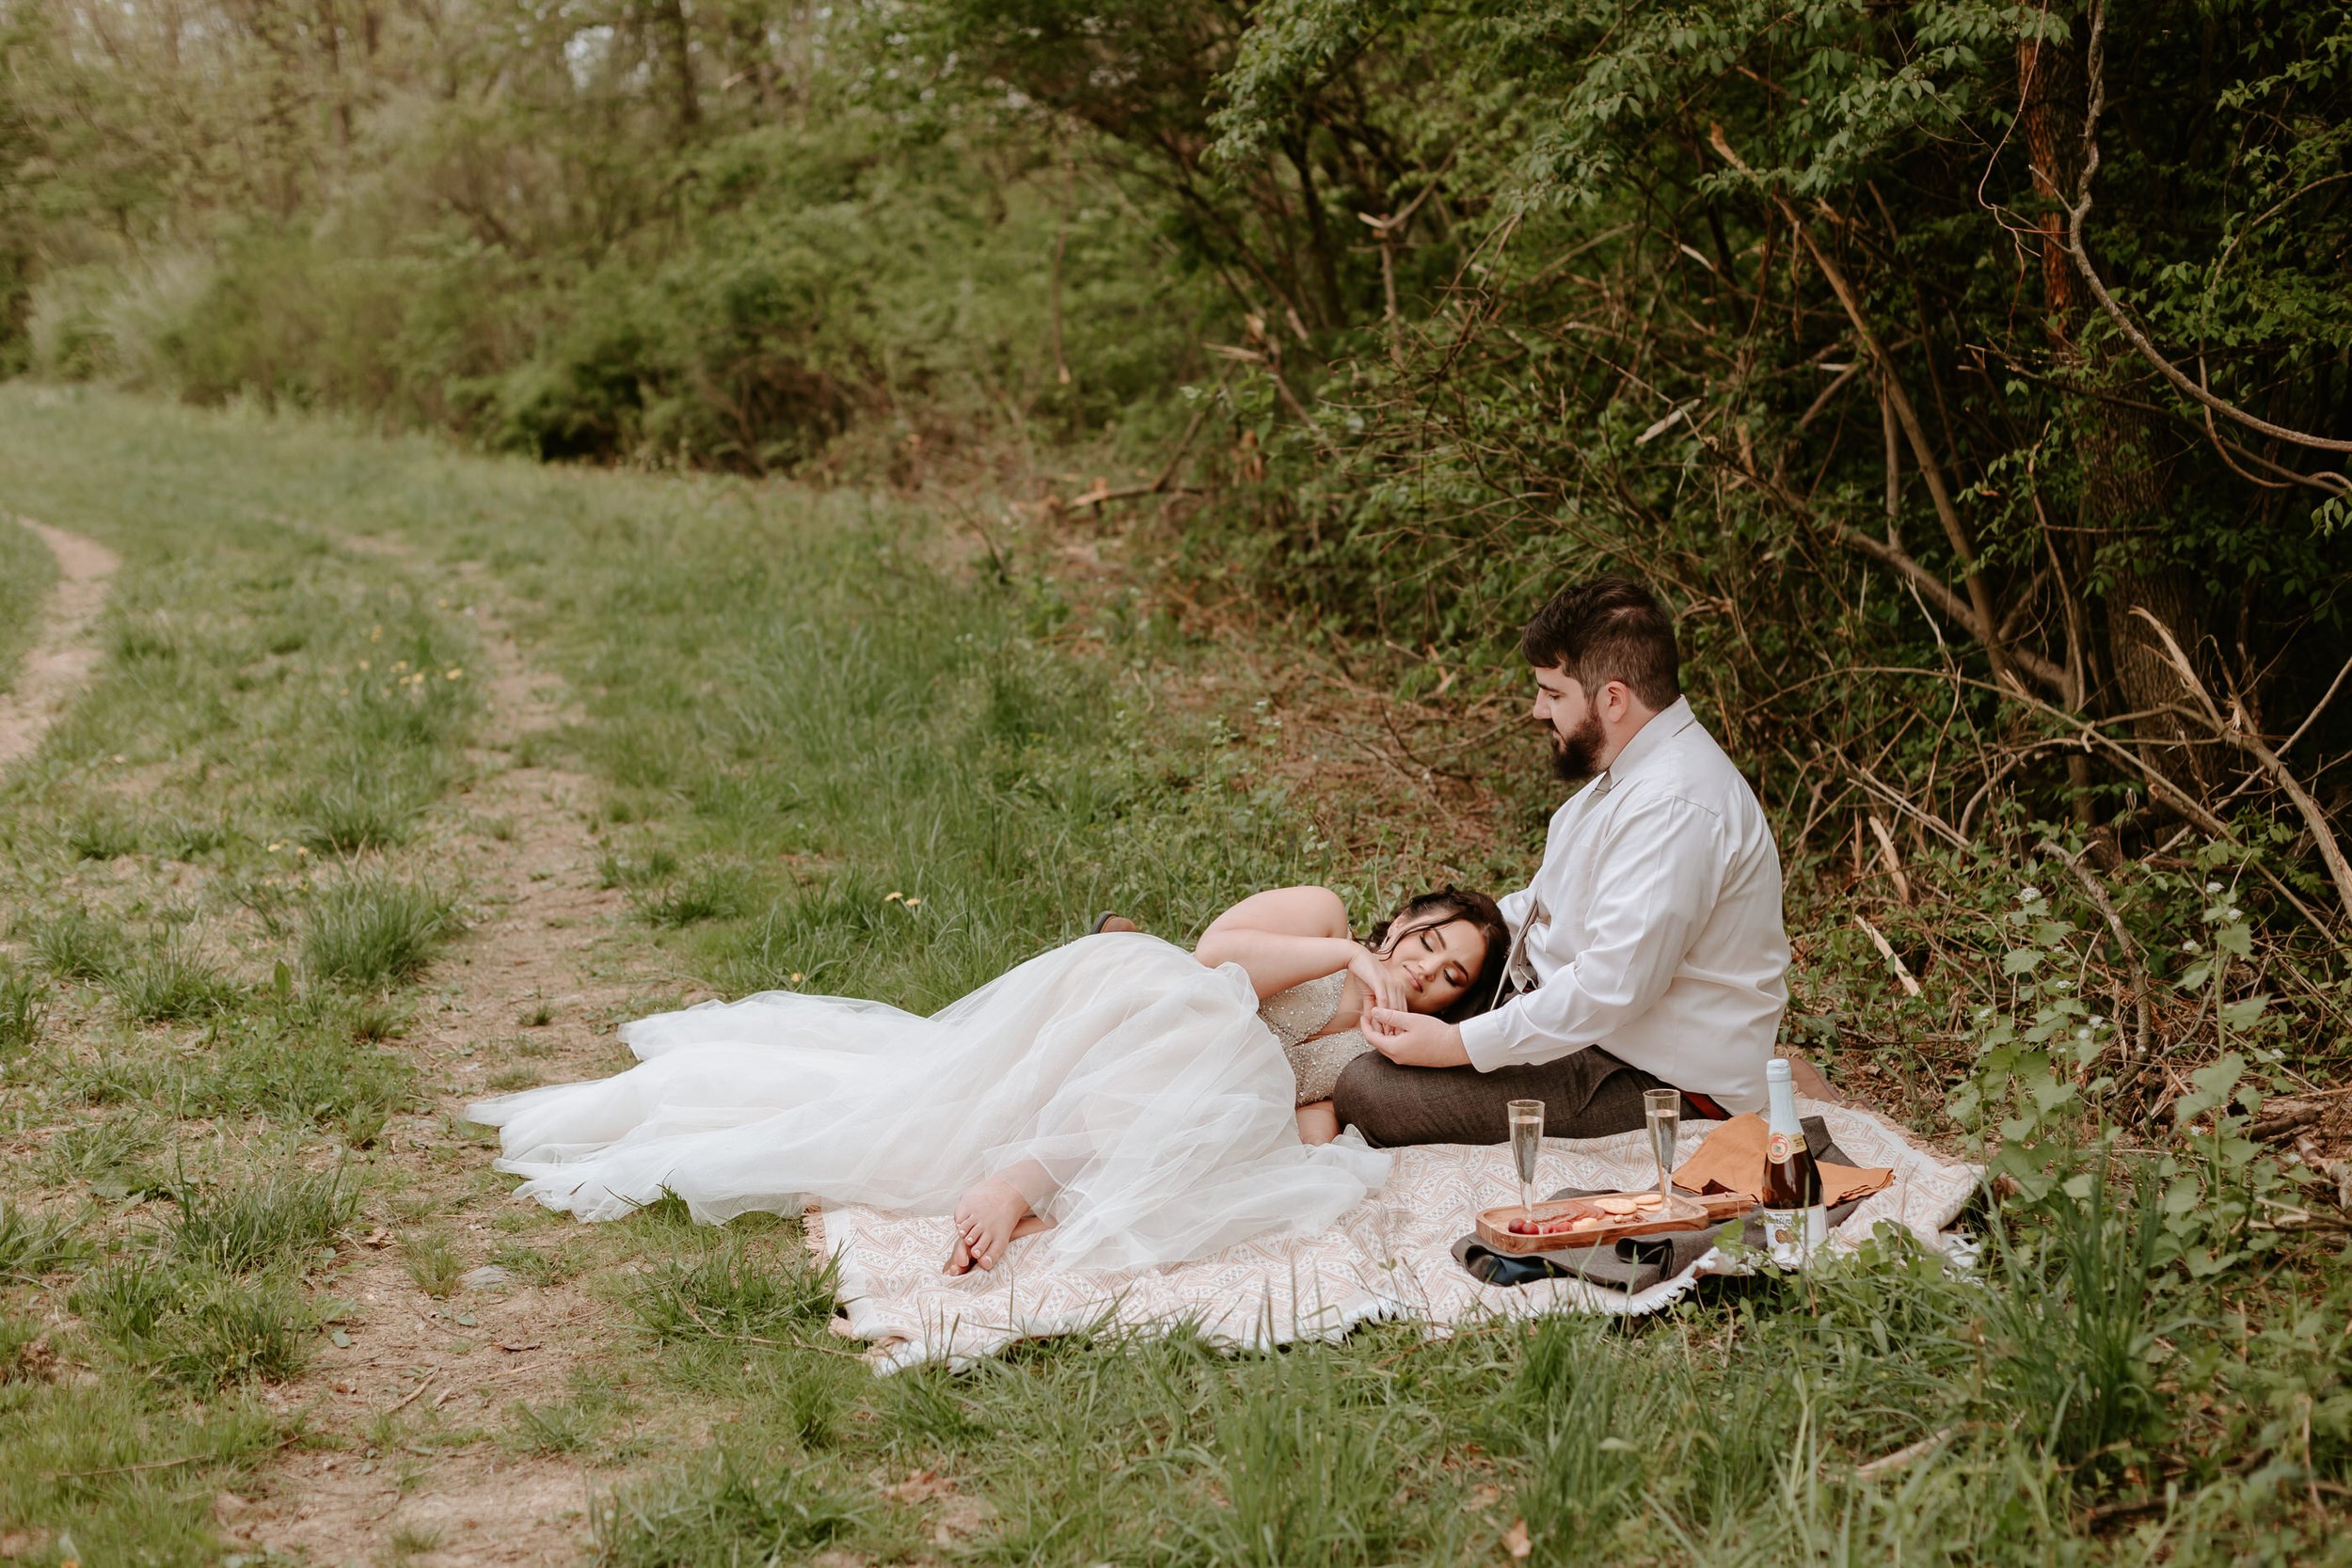 Bride lays on grooms lap during a picnic.